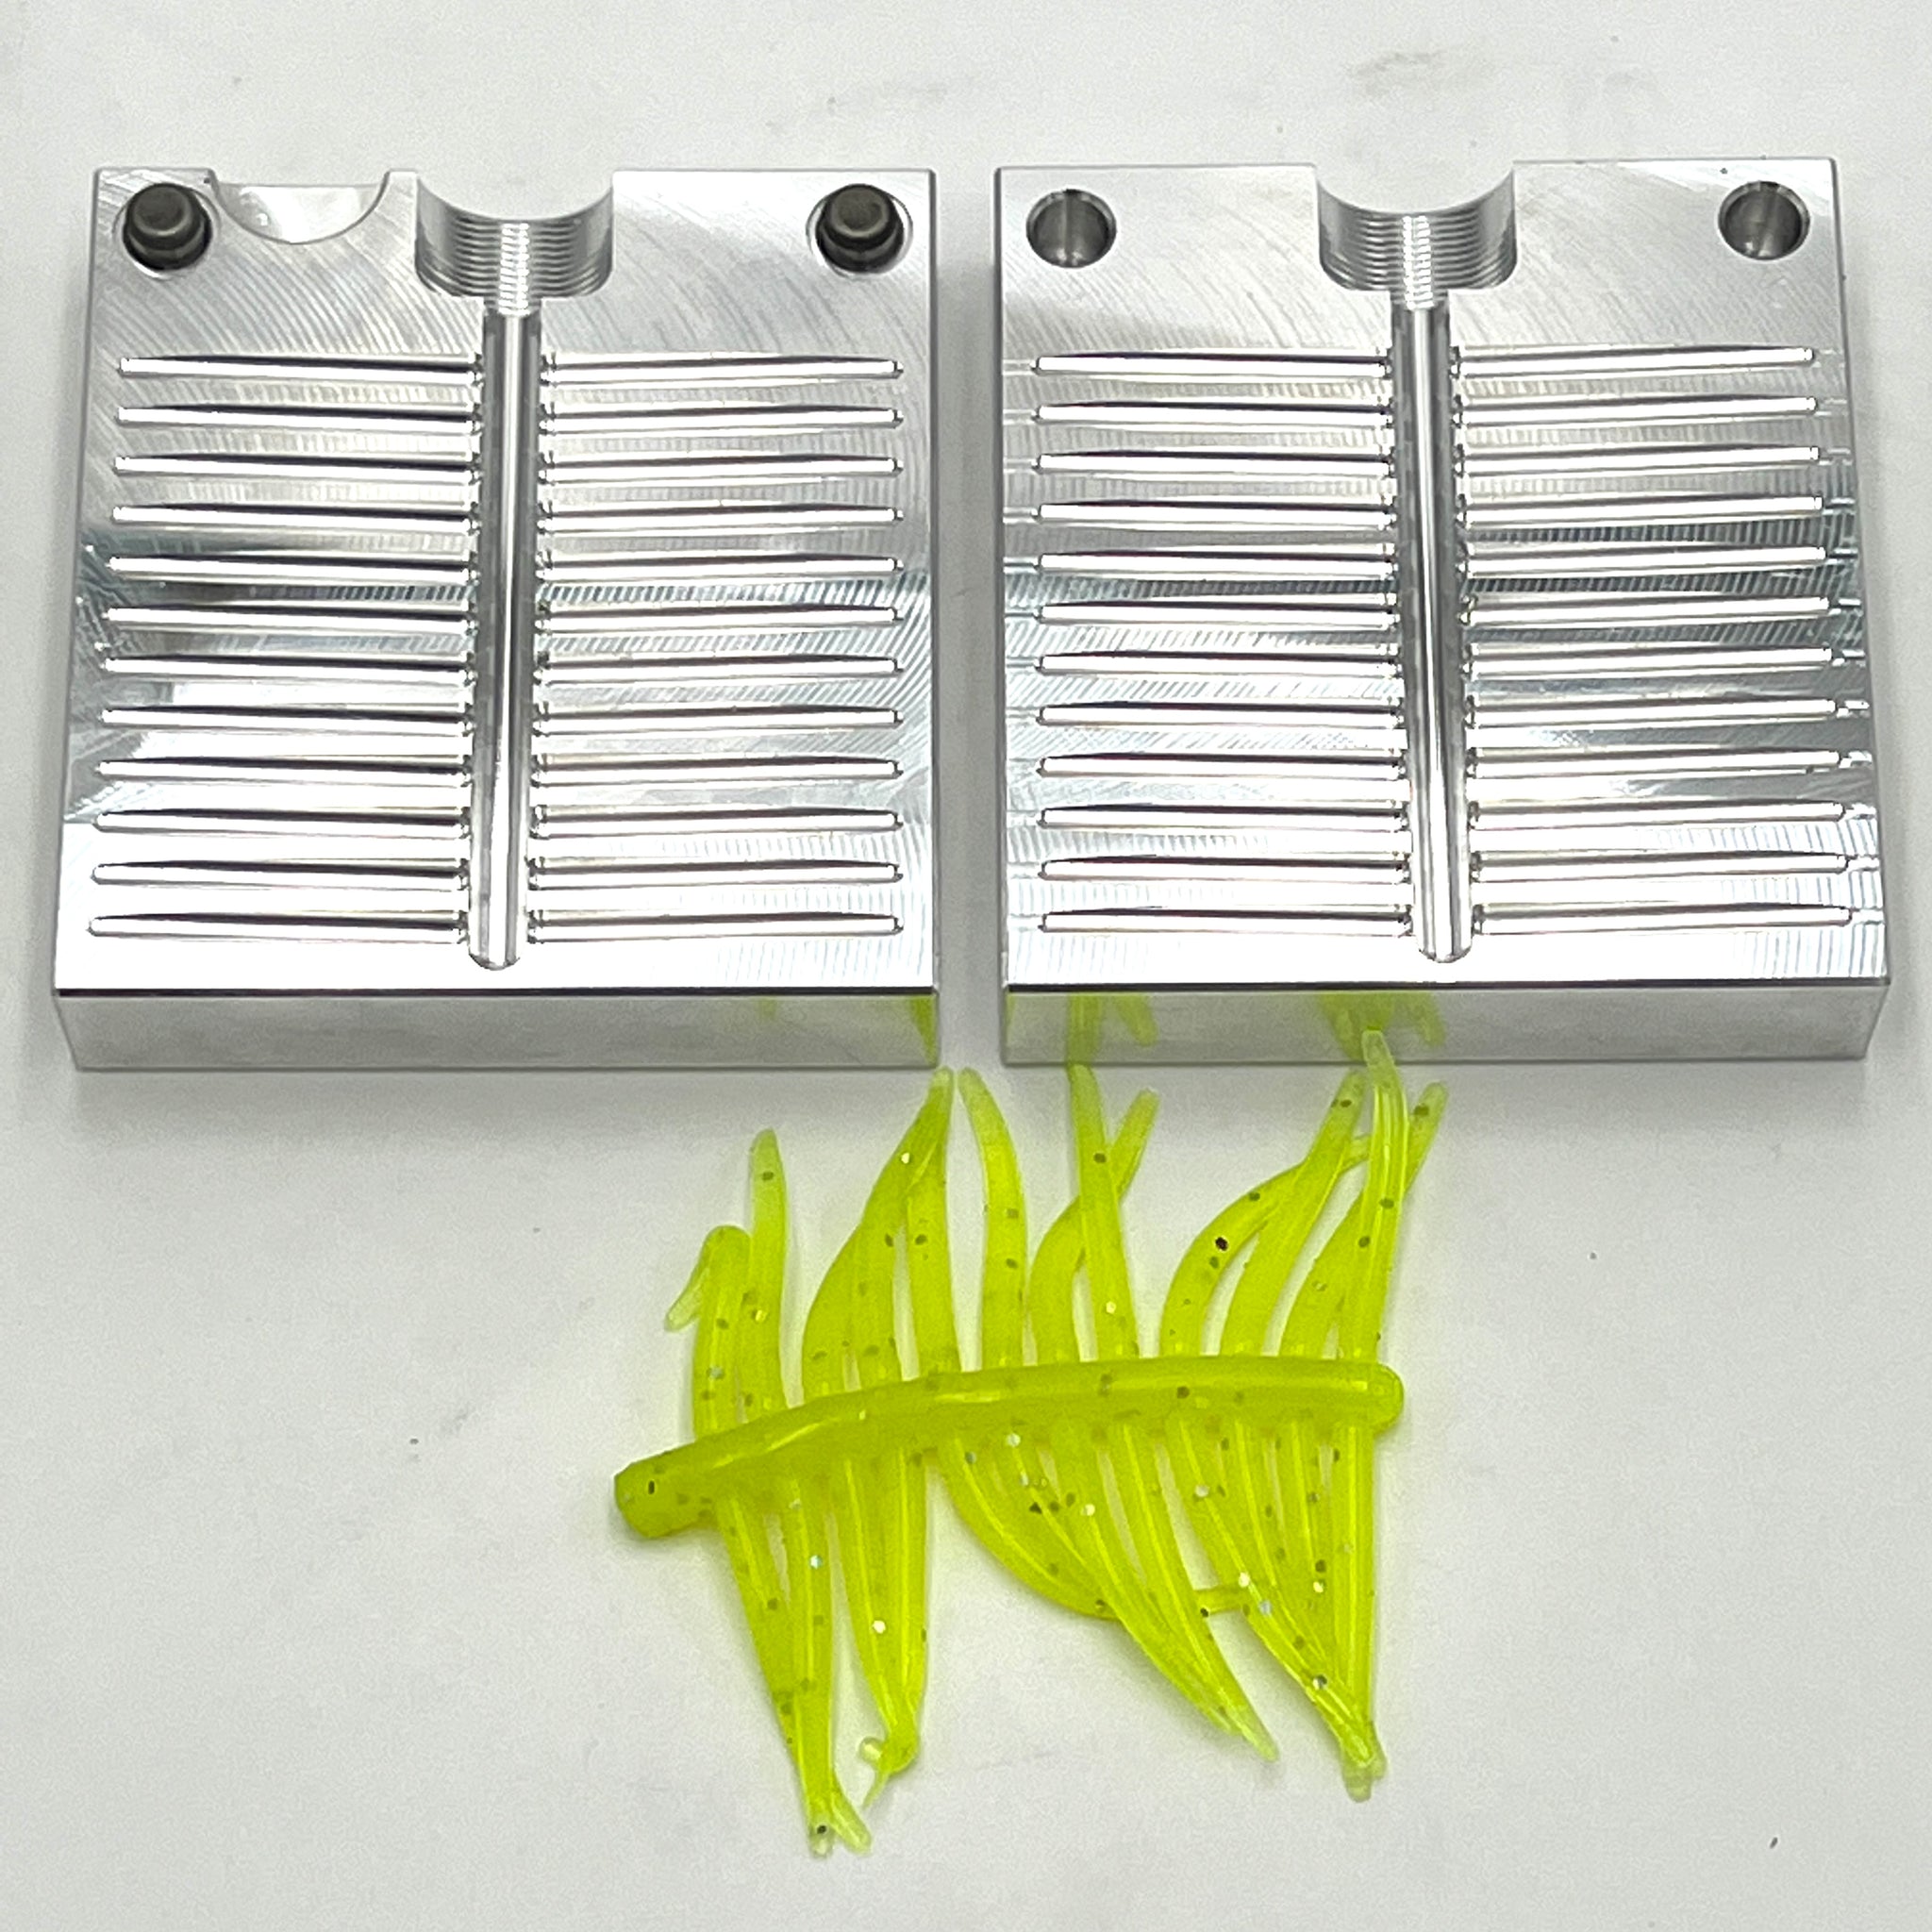 1.2in Crappie Slayer Hand Injection Mold – Epic Bait Molds